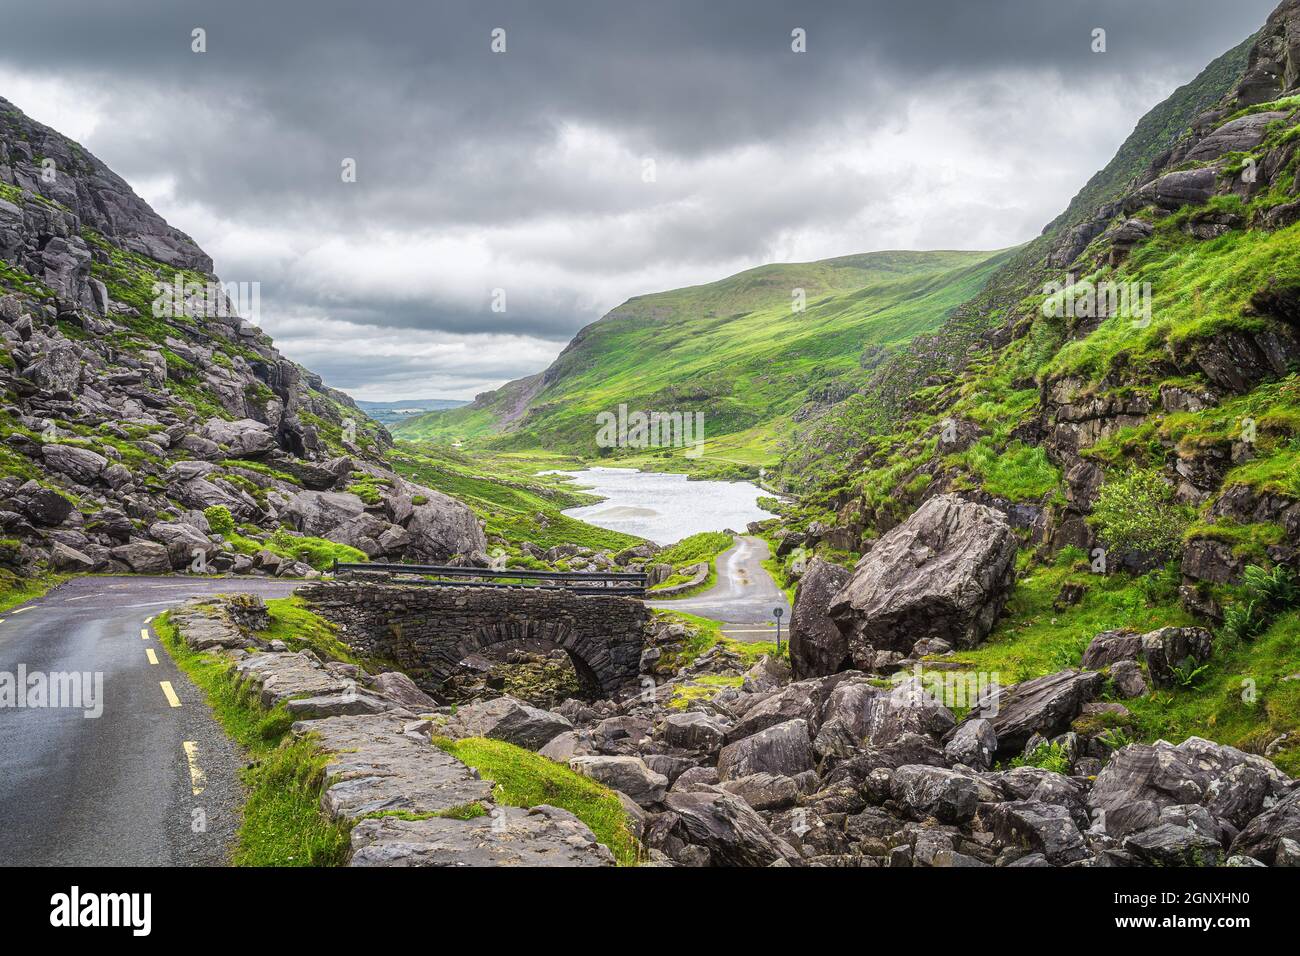 Narrow winding road and stone bridge with a view on Gap of Dunloe valley  and lake in Black Valley, Ring of Kerry, County Kerry, Ireland Stock Photo  - Alamy